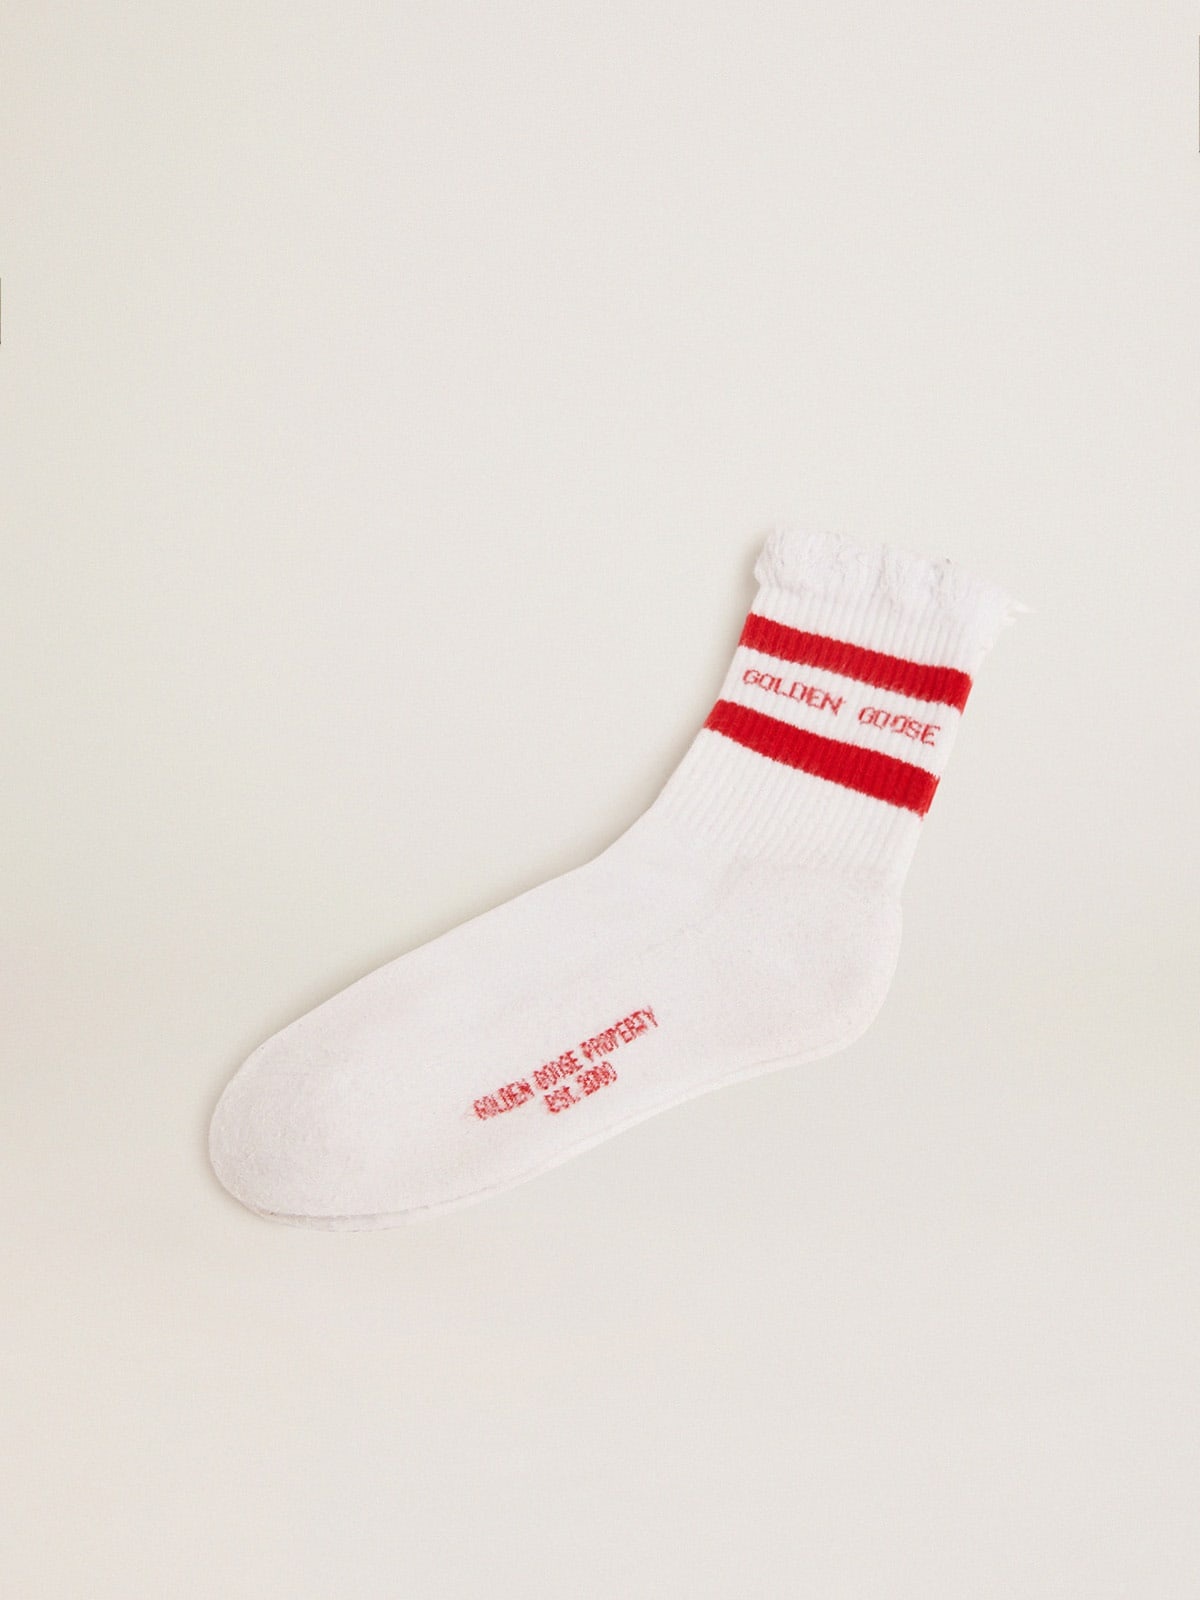 Cotton socks with distressed finishes, red stripes and logo - 1